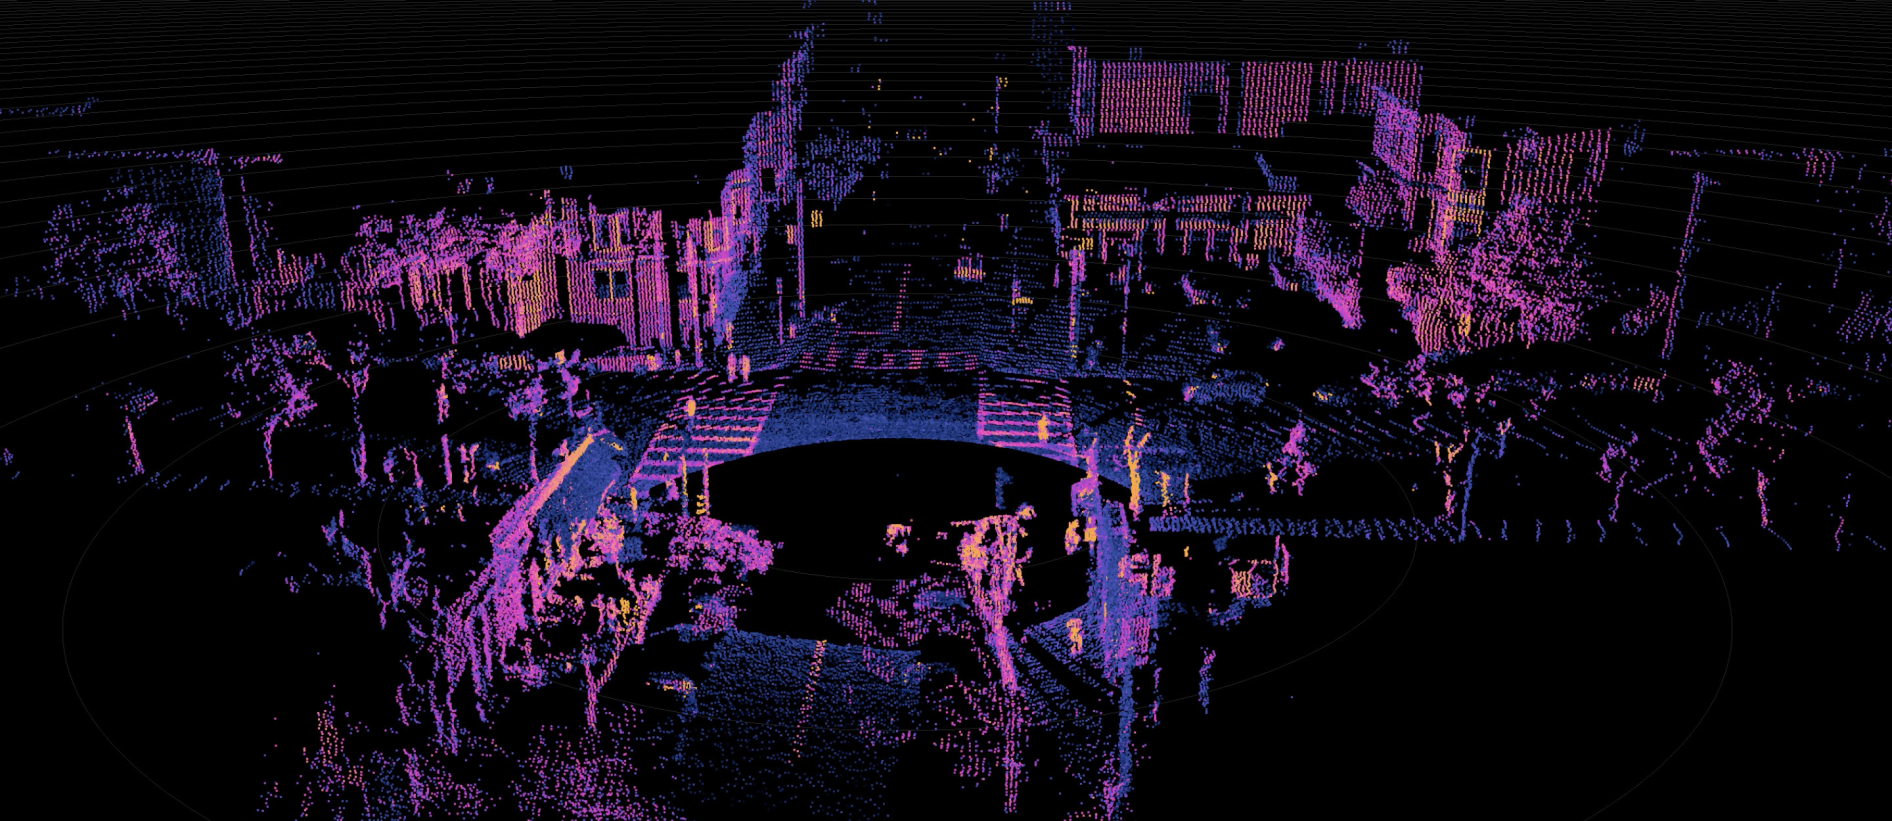 A point cloud from an ouster sensor